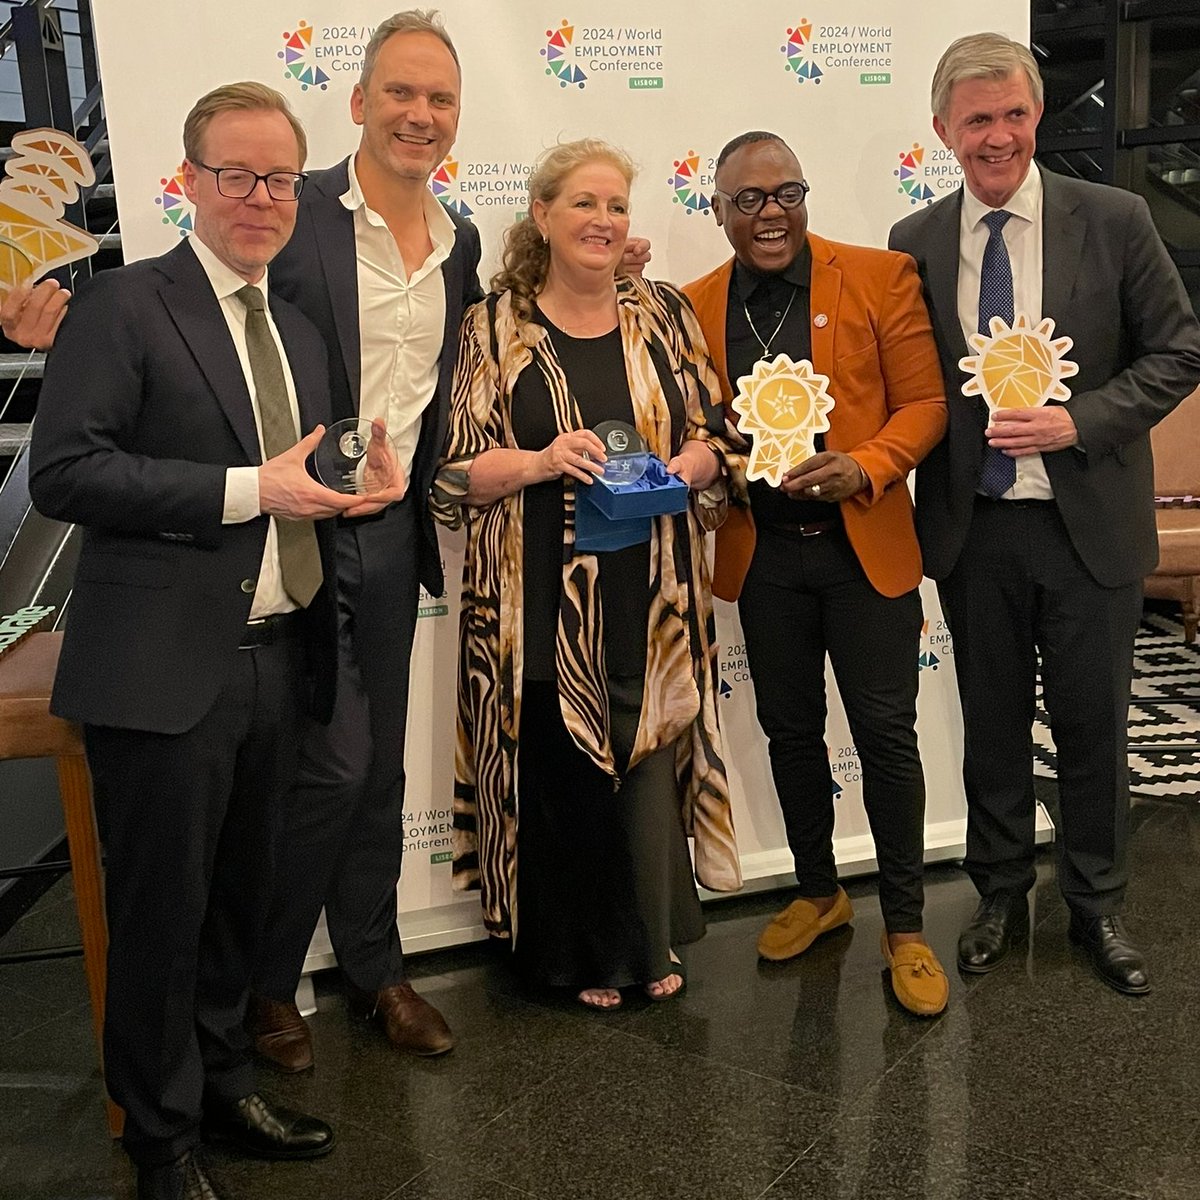 #WEC2024Lisbon We have our #WECAwards2024 winners! 👏@Kompetens_ftgs @RCSA_official @APSOZA and Engma for your outstanding achievements and your contribution to #HRservices industry excellence!